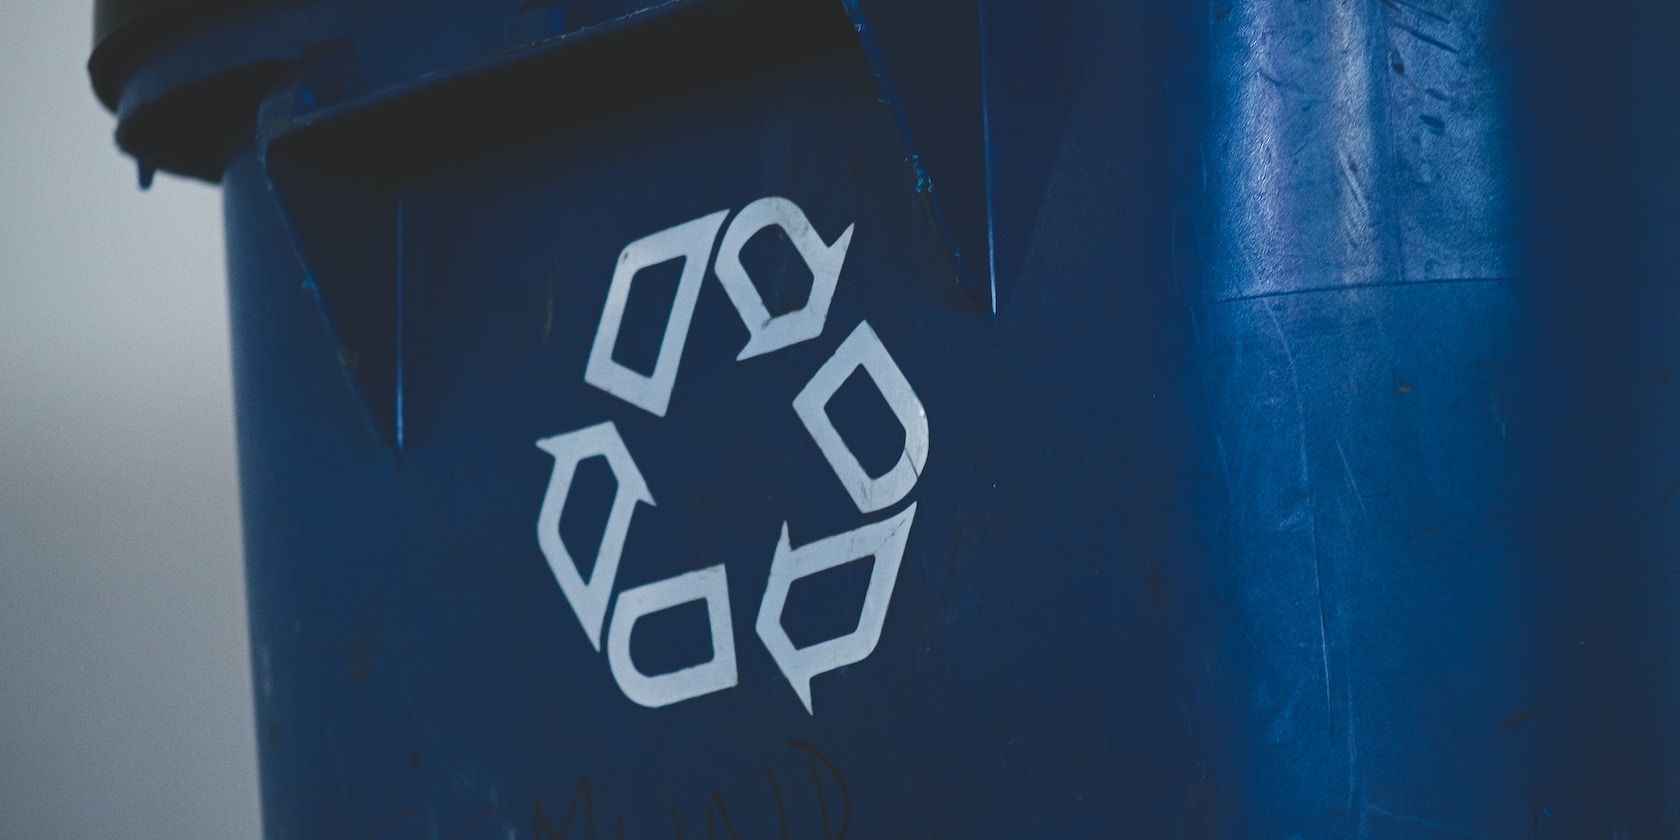 A Blue Recycle Bin With a White Logo for Recycling